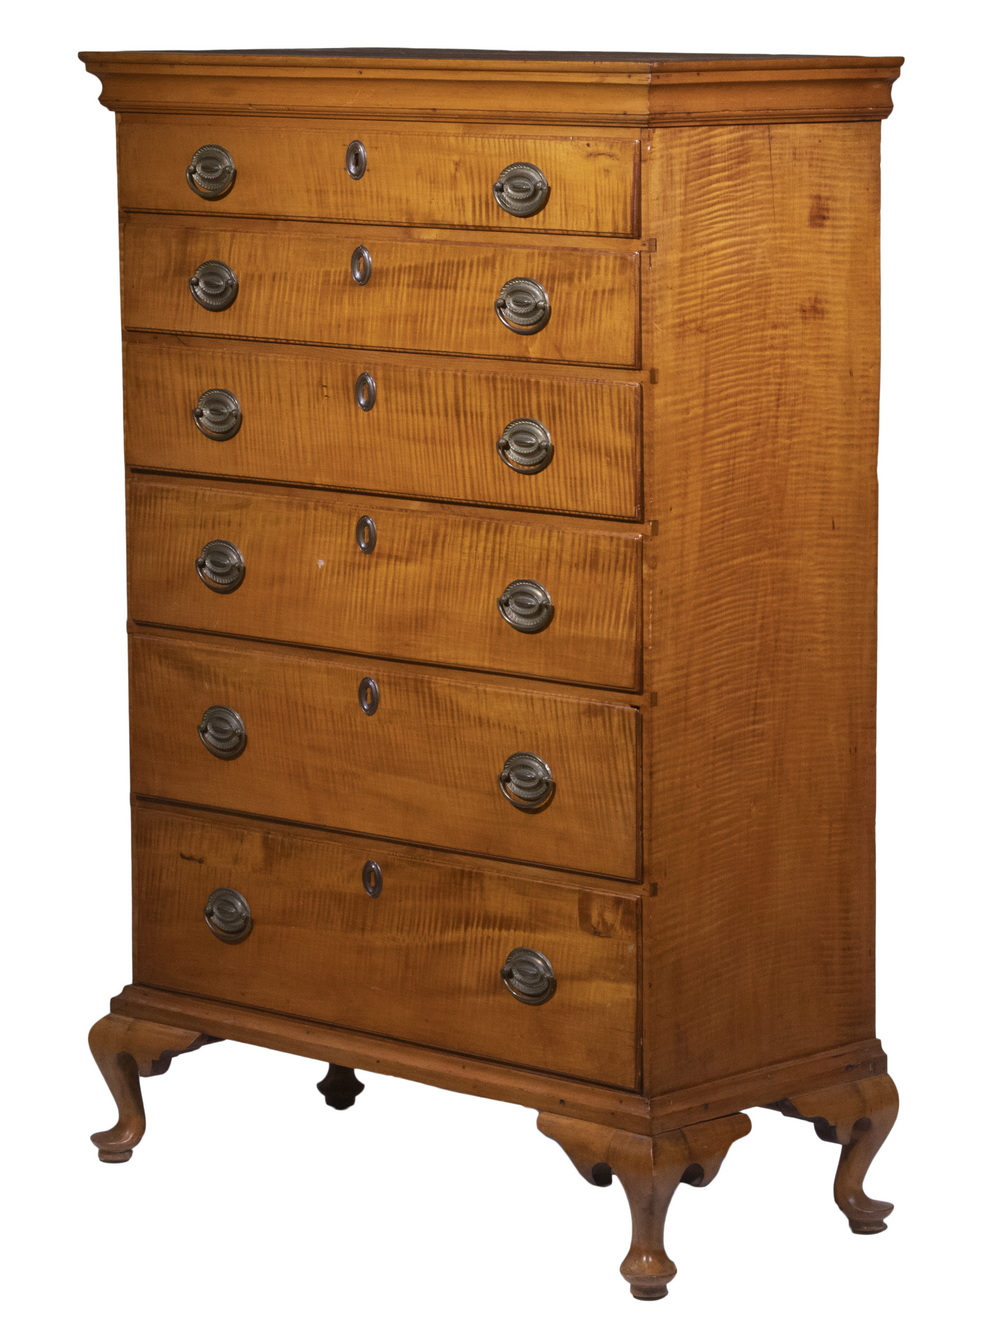 QUEEN ANNE TIGER MAPLE CHEST ON STAND 30228e